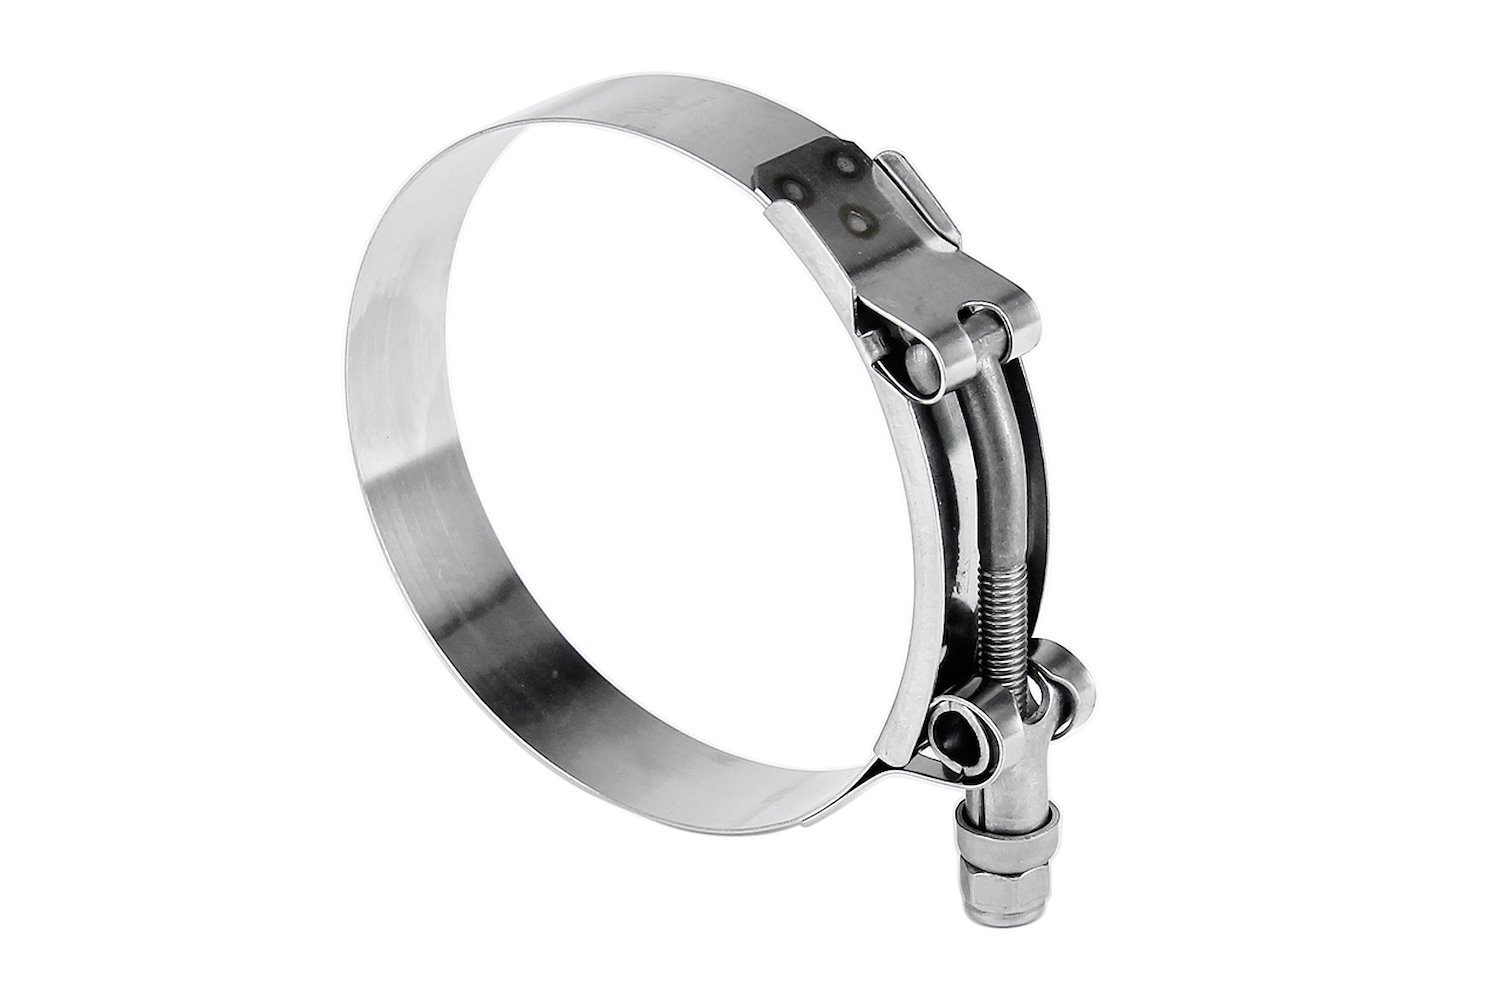 316-SSTC-191-199 100-Percent Marine Grade Stainless Steel T-Bolt Hose Clamp, Size #212, Range: 7.5 in.- 7.81 in.